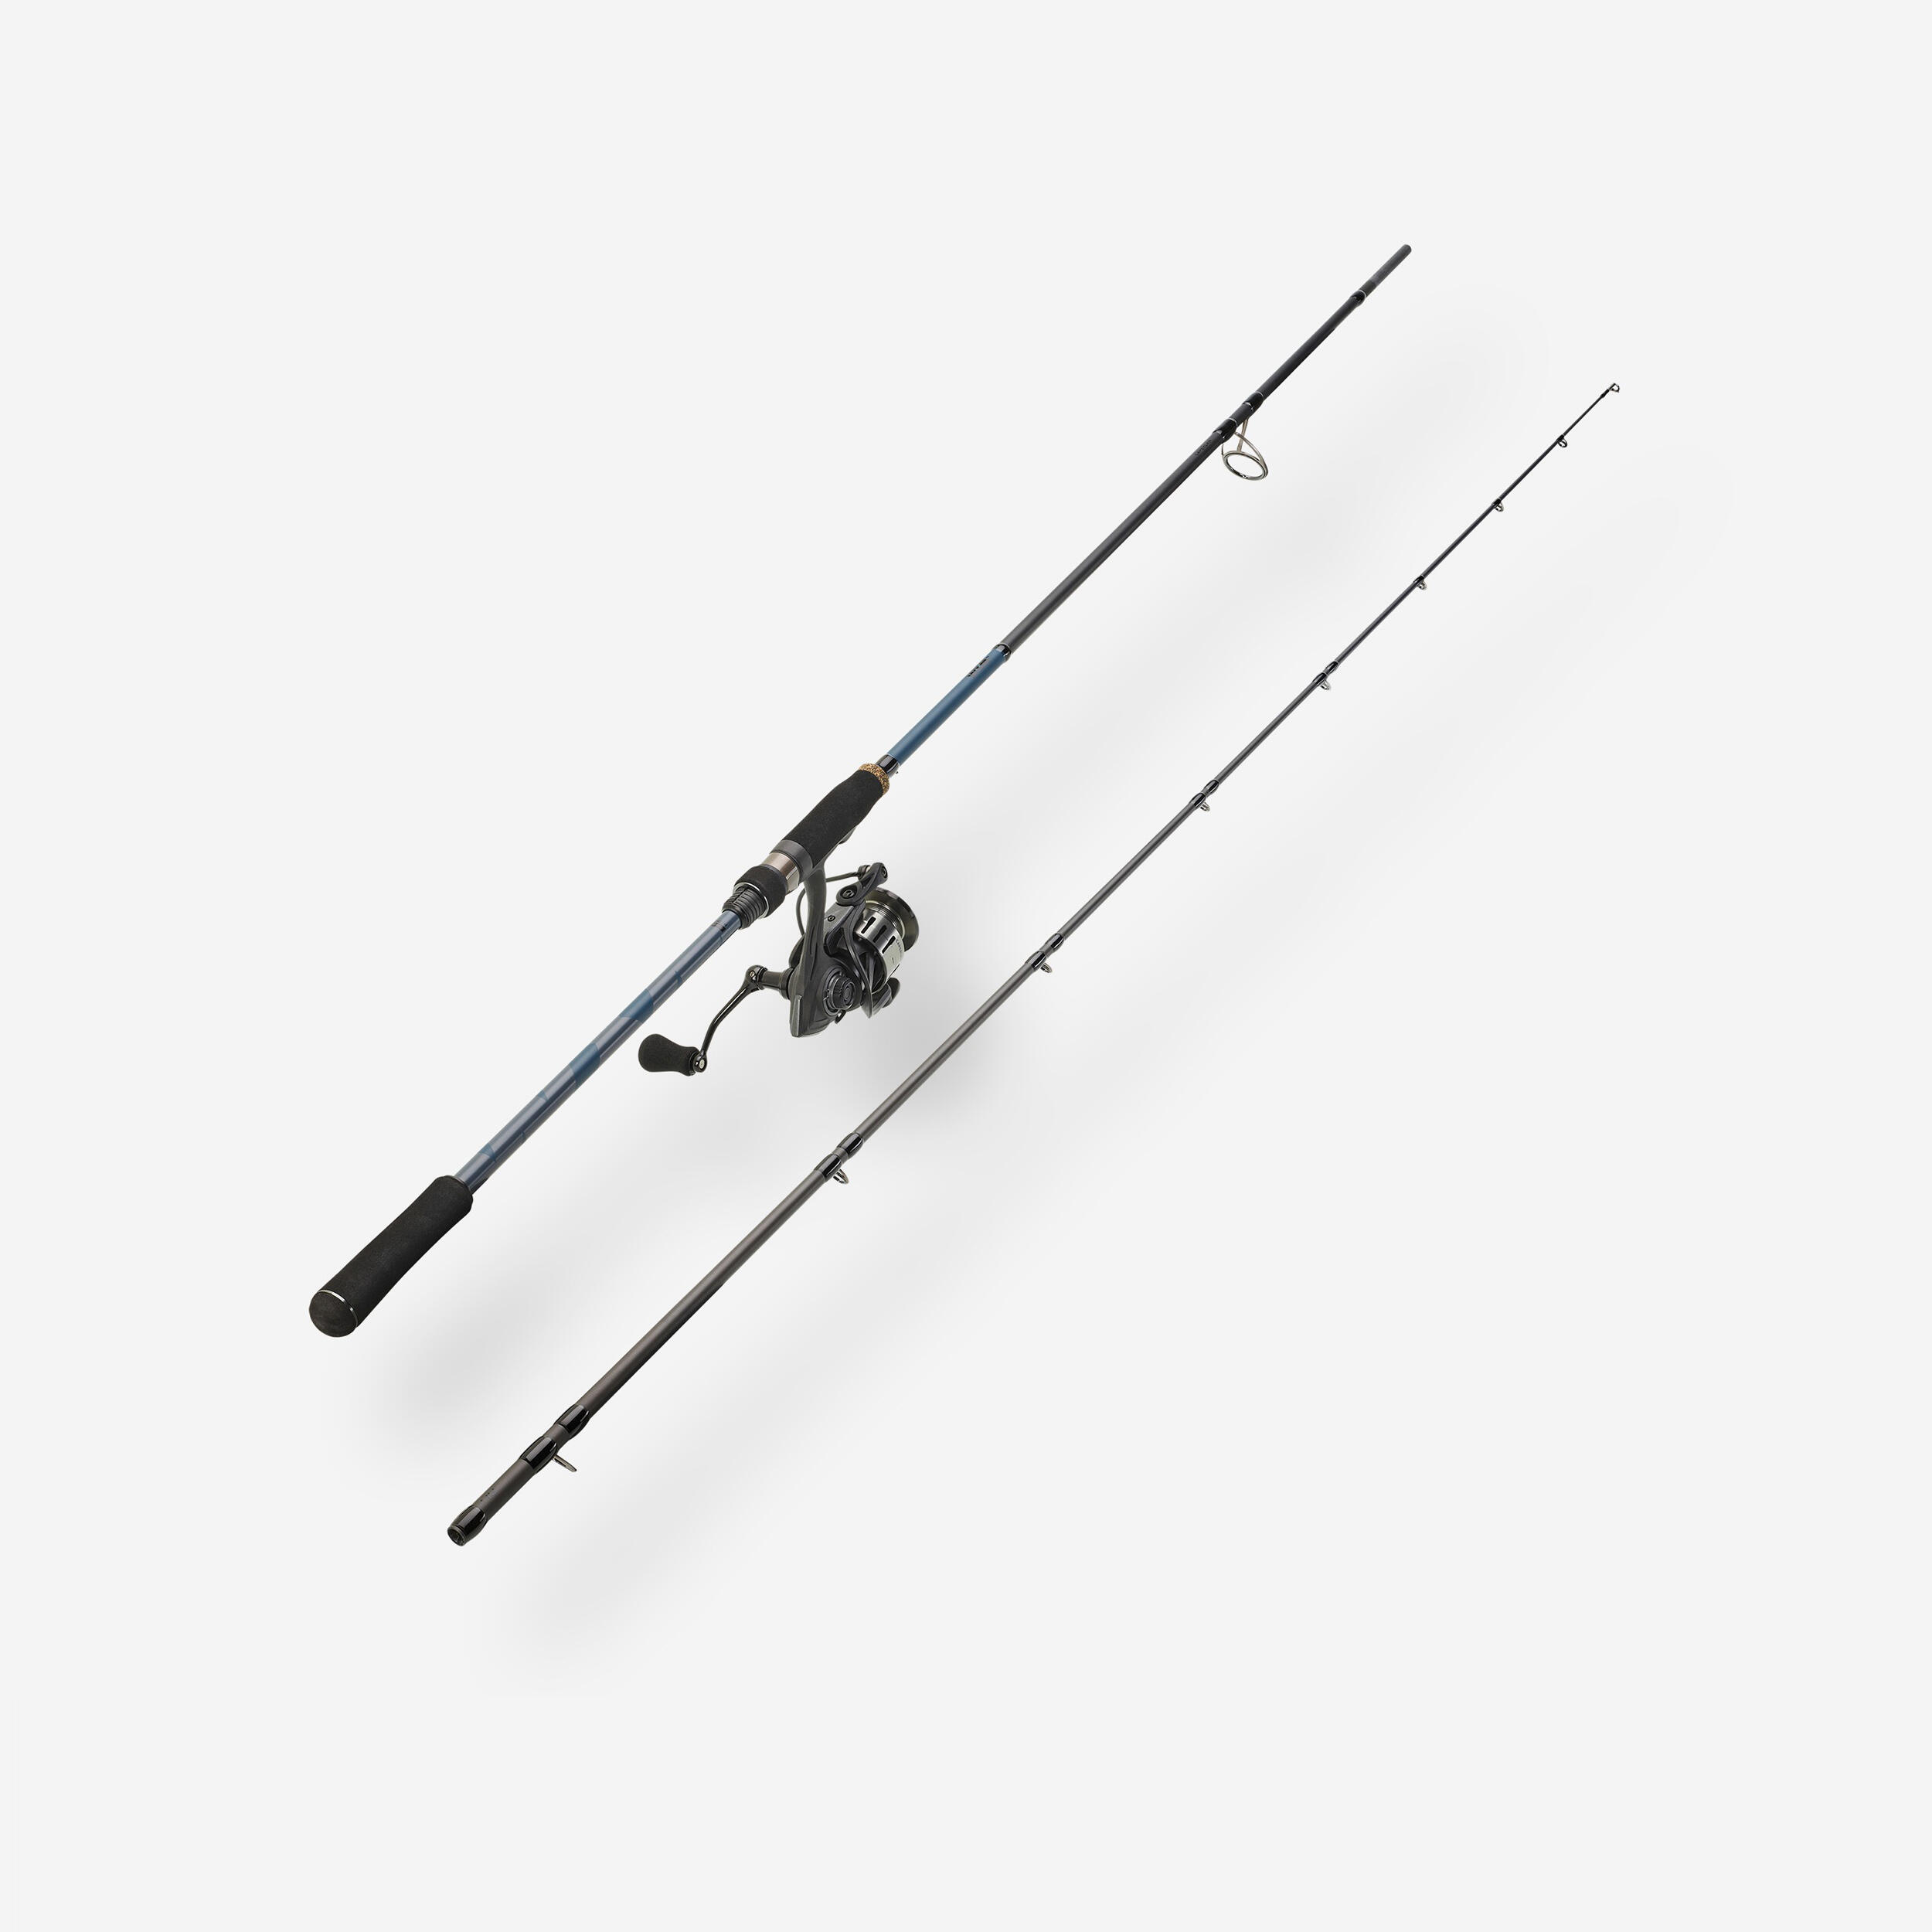 COMBO LURE FISHING ROD AND REEL WXM-5 240 H CAPERLAN